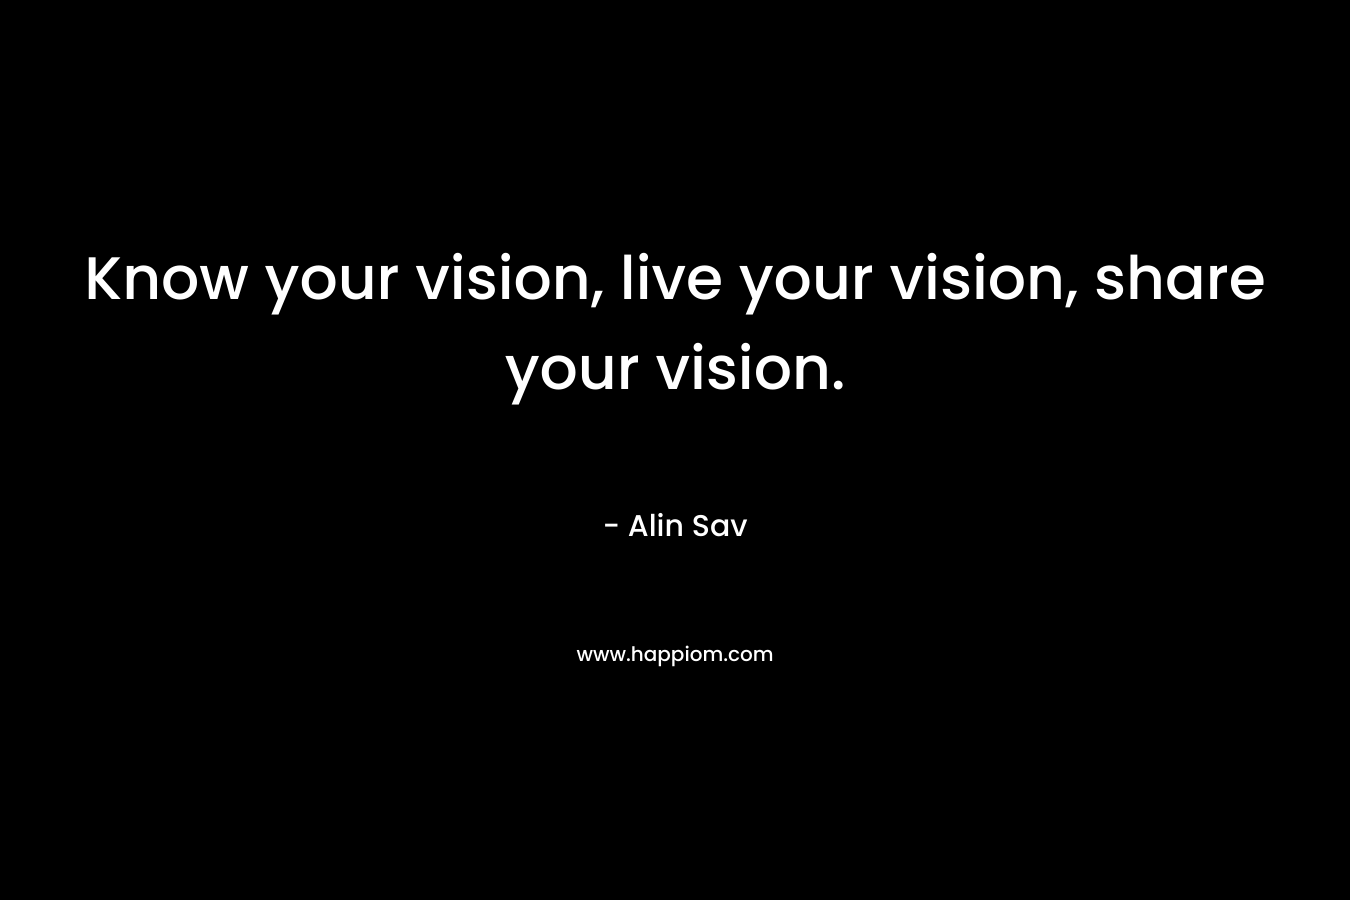 Know your vision, live your vision, share your vision.